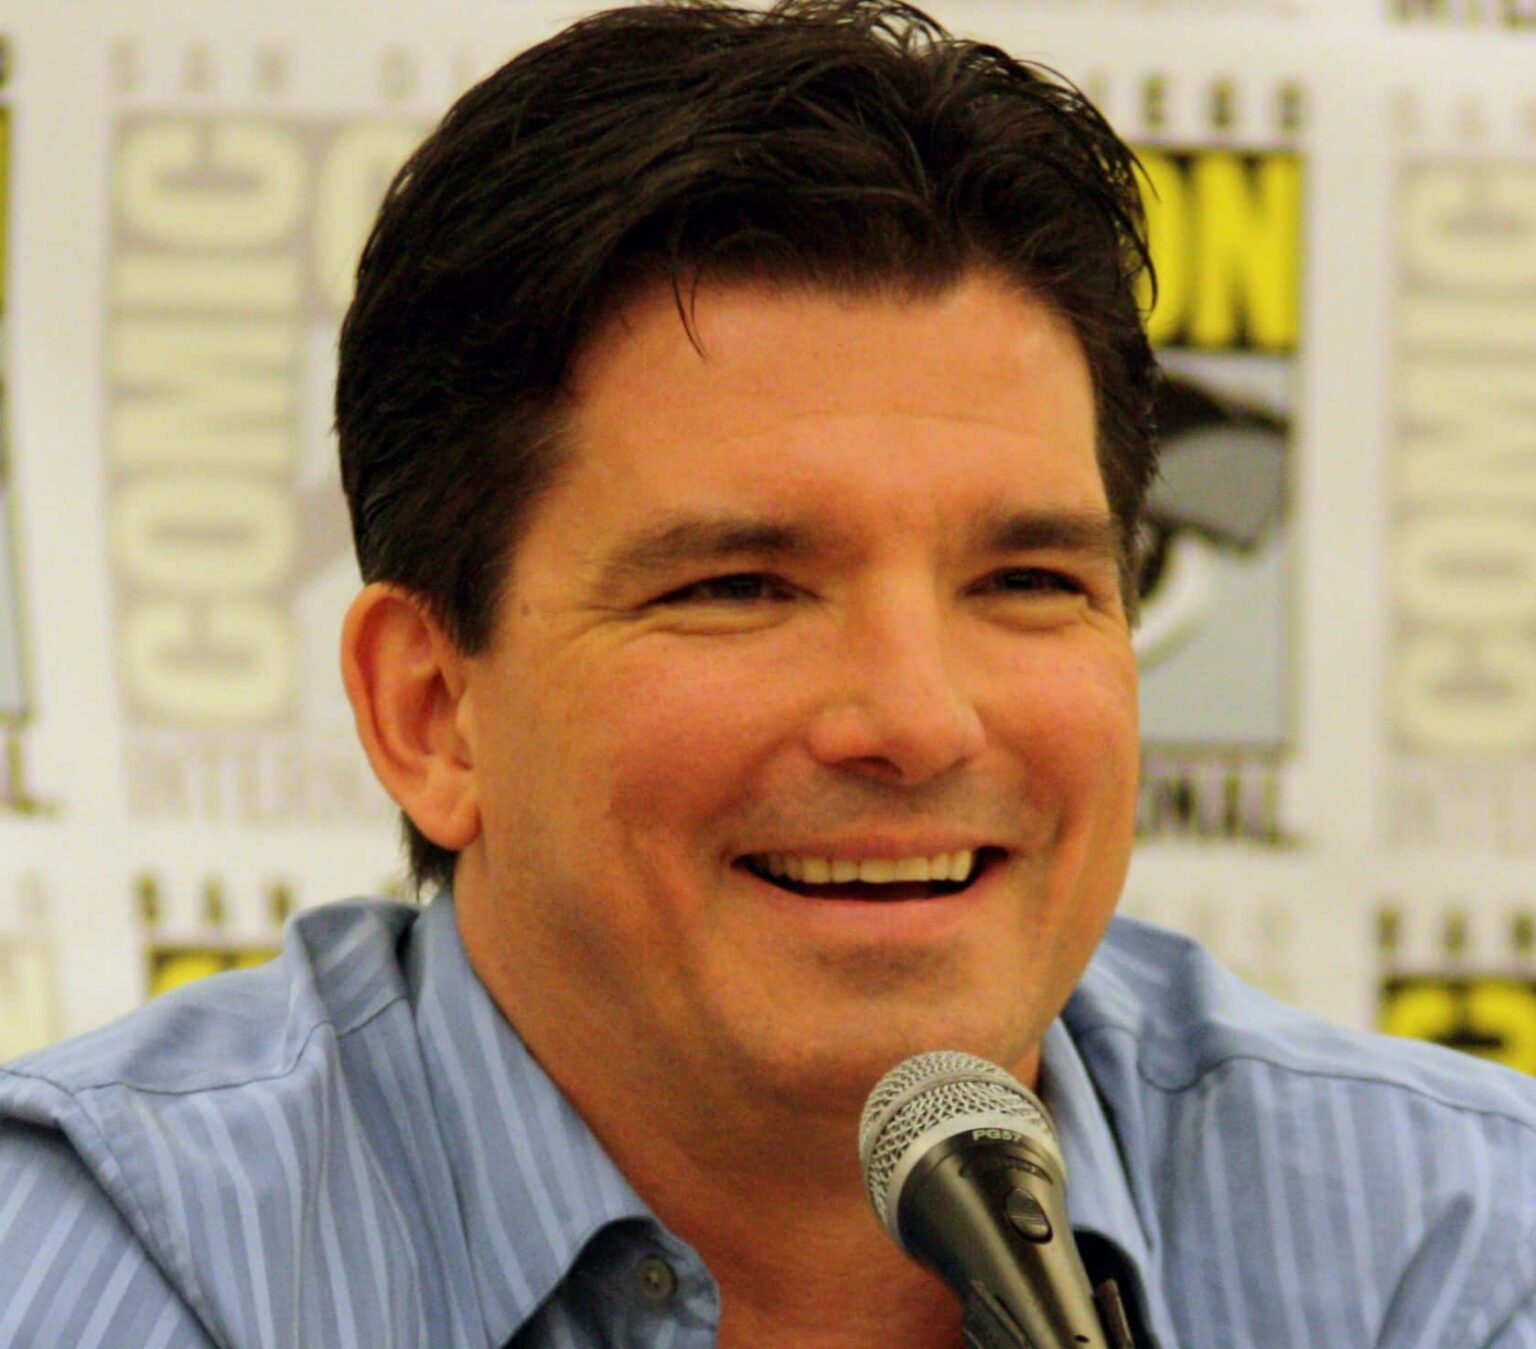 A plagiarism scandal? Butch Hartman has been to this type of online rodeo before. Read all about the animator's other fairly odd controversies!